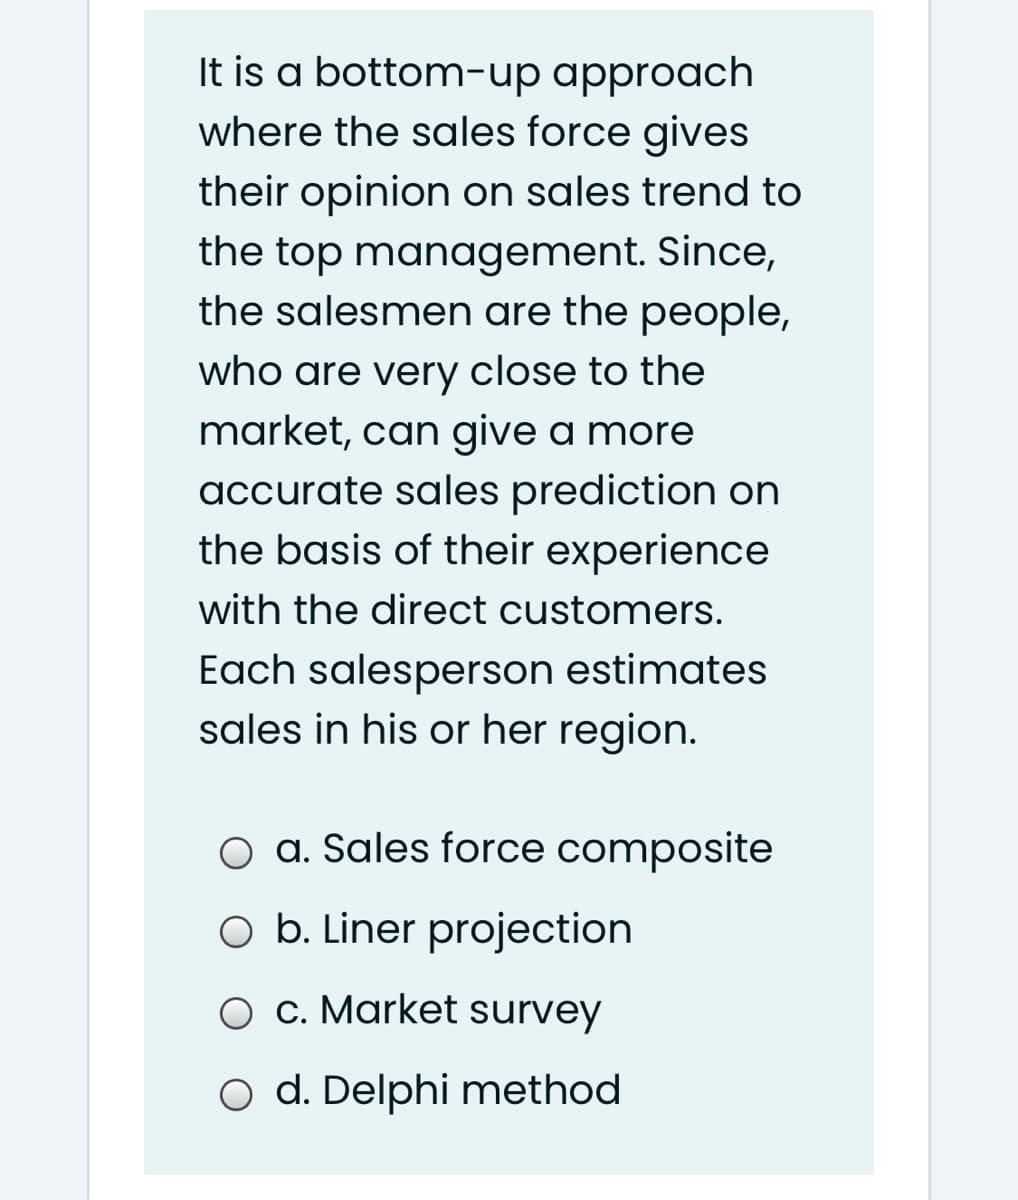 It is a bottom-up approach
where the sales force gives
their opinion on sales trend to
the top management. Since,
the salesmen are the people,
who are very close to the
market, can give a more
accurate sales prediction on
the basis of their experience
with the direct customers.
Each salesperson estimates
sales in his or her region.
O a. Sales force composite
O b. Liner projection
O c. Market survey
O d. Delphi method
